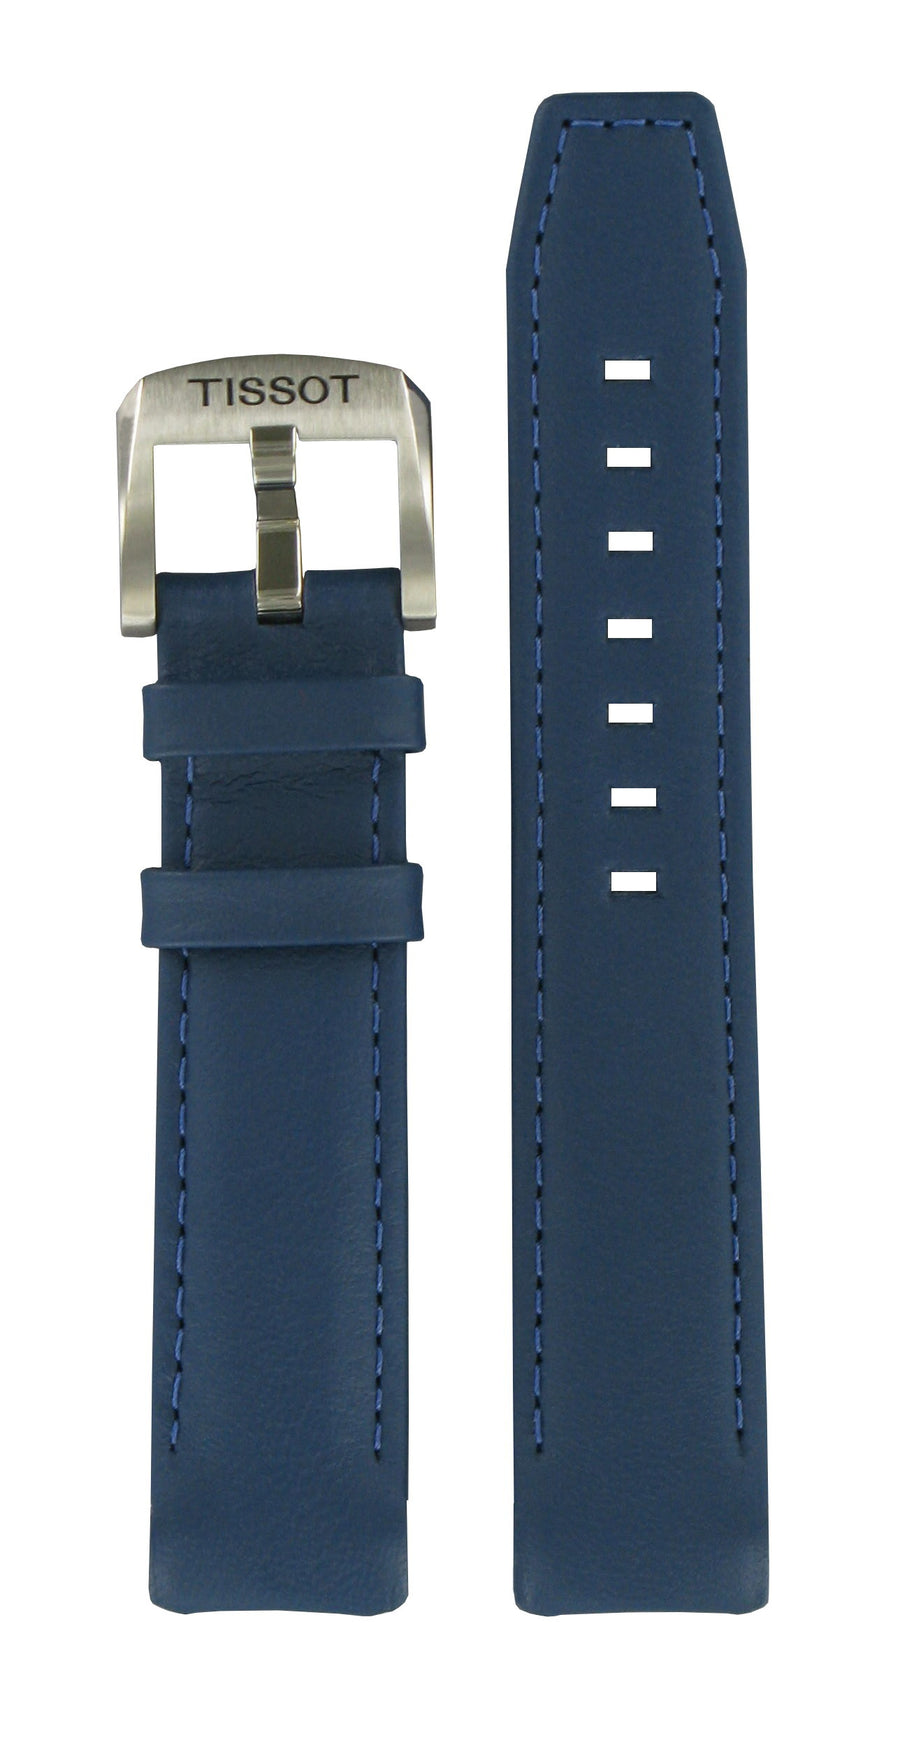 Tissot T-Touch Women's Blue Leather Watch Band Strap - WATCHBAND EXPERT